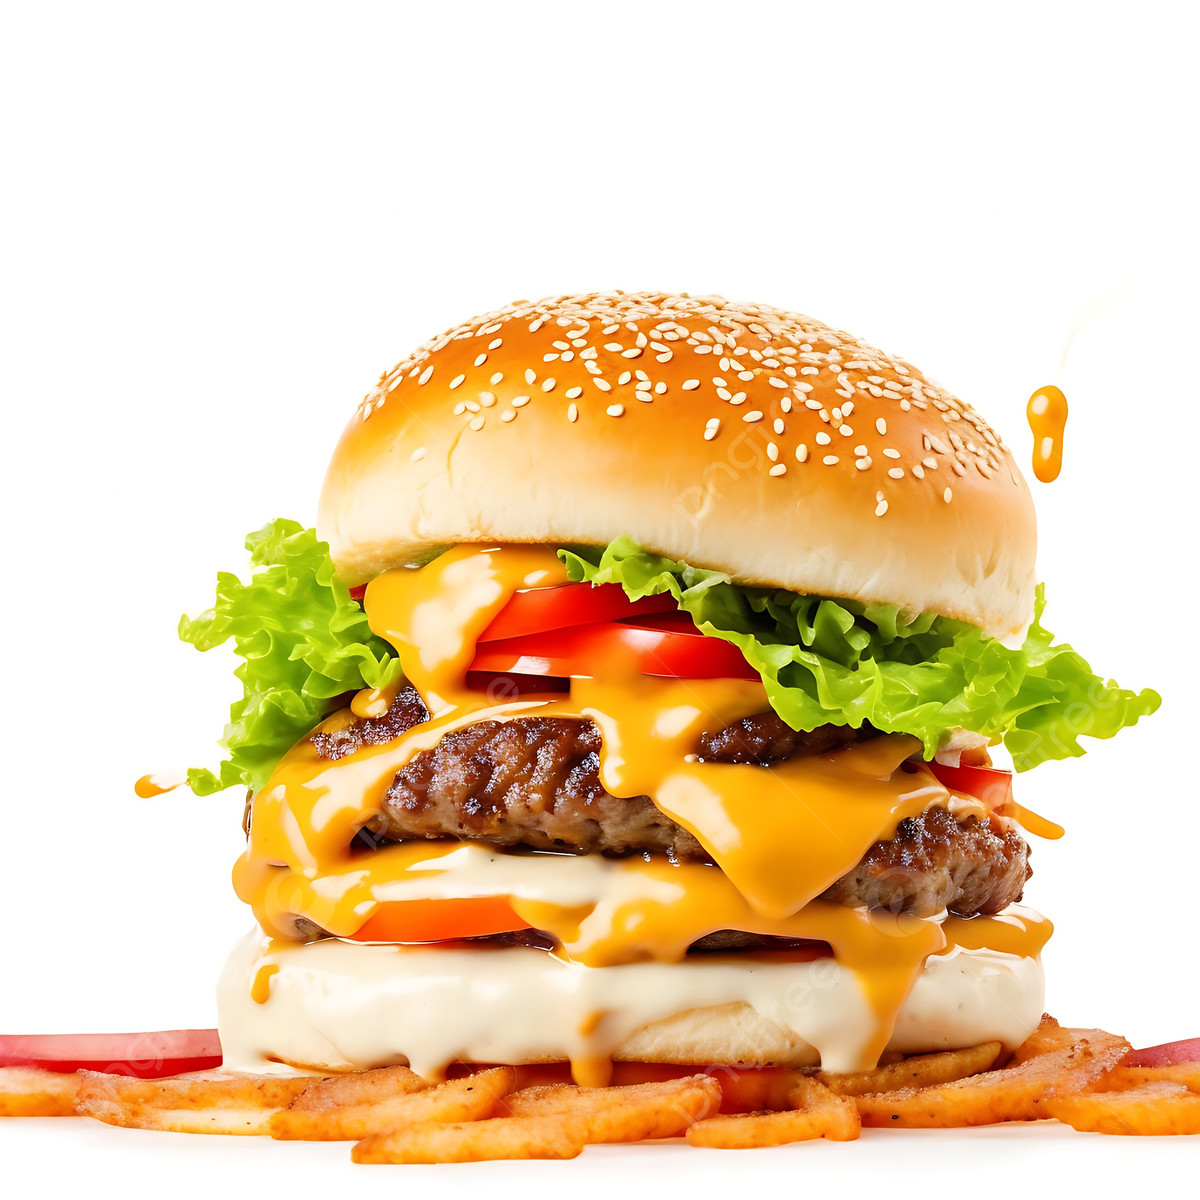 pngtree-delicious-burger-with-many-ingredients-isolated-on-white-background-tasty-cheeseburger-picture-image_3713226